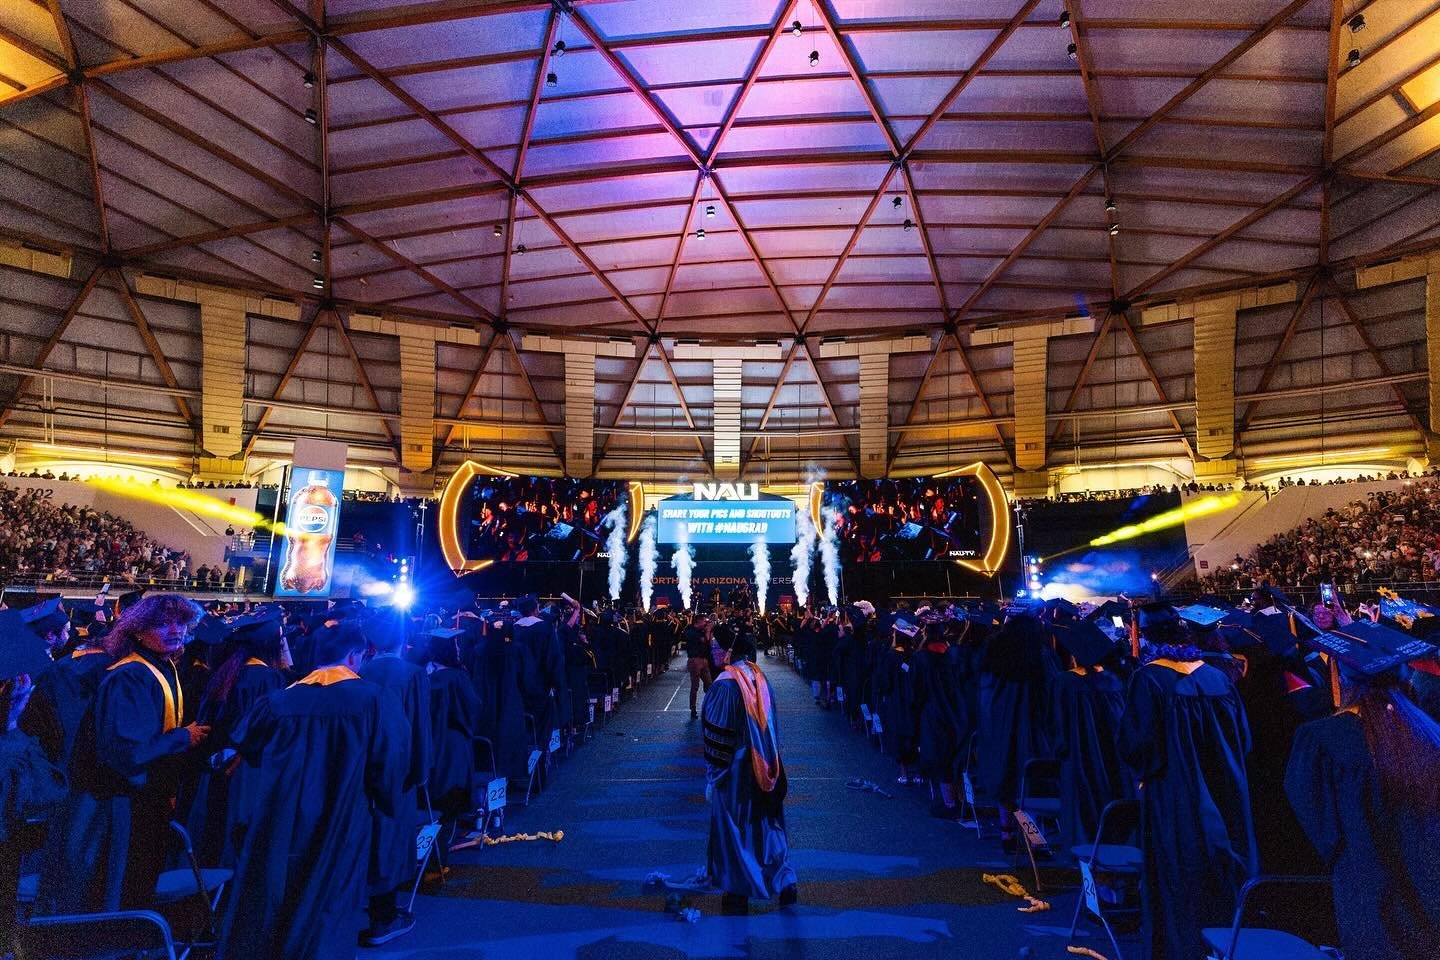 &ldquo;And now we dance!&rdquo;

After years of successful audio shows, Commencement at Northern Arizona University was kicked up a notch this year with an all new lighting package and dance party complete with Chauvet Pro&rsquo;s Vesuvio II fog cann